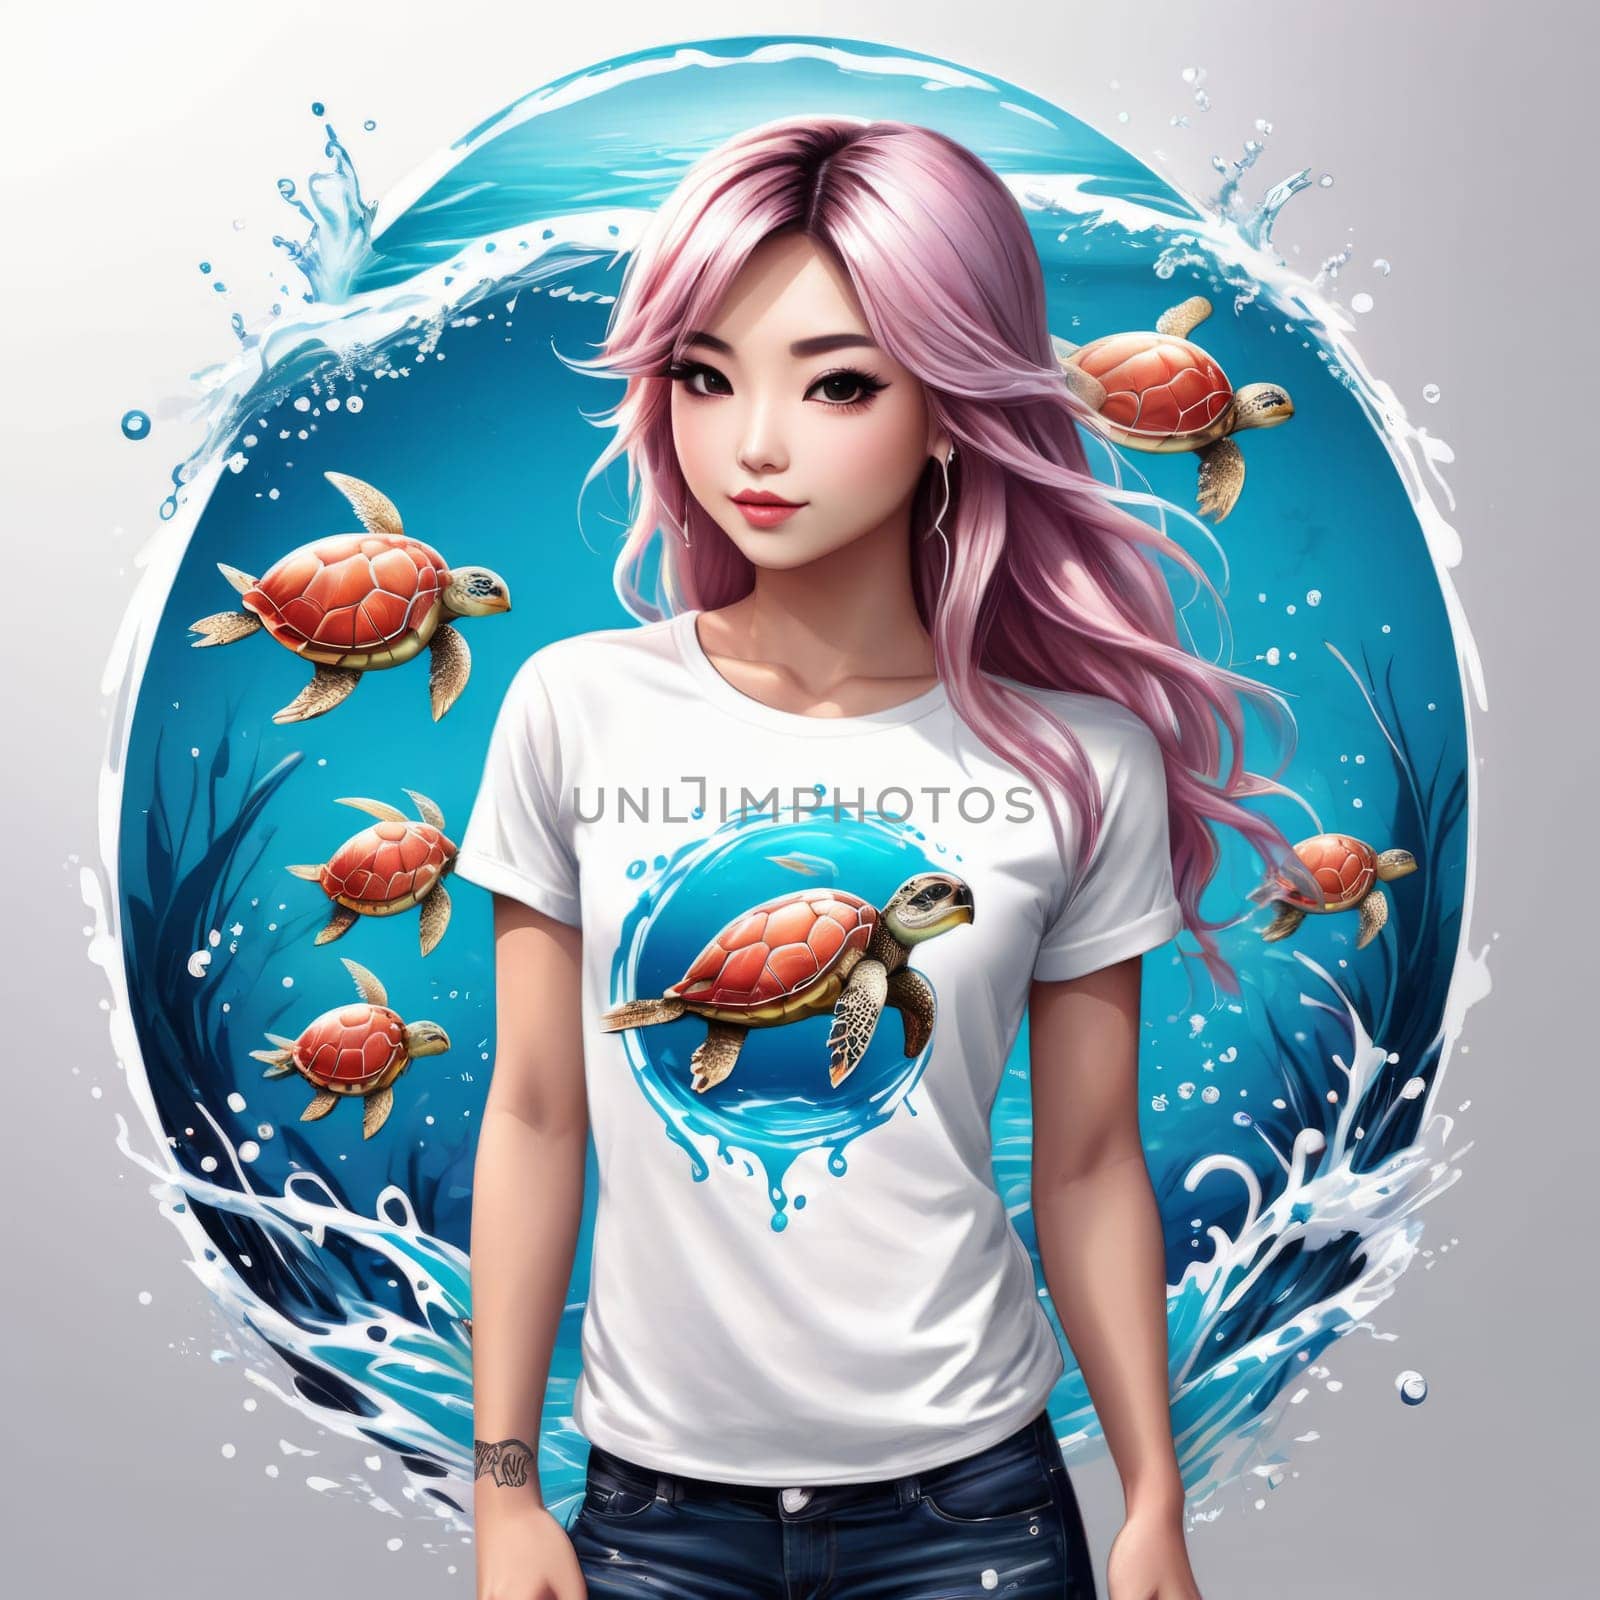 Woman wearing white t-shirt with turtle design. For fashion, clothing design, animal themed clothing advertising, simply as illustration for interesting clothing style, Tshirt print, tourism. by Angelsmoon